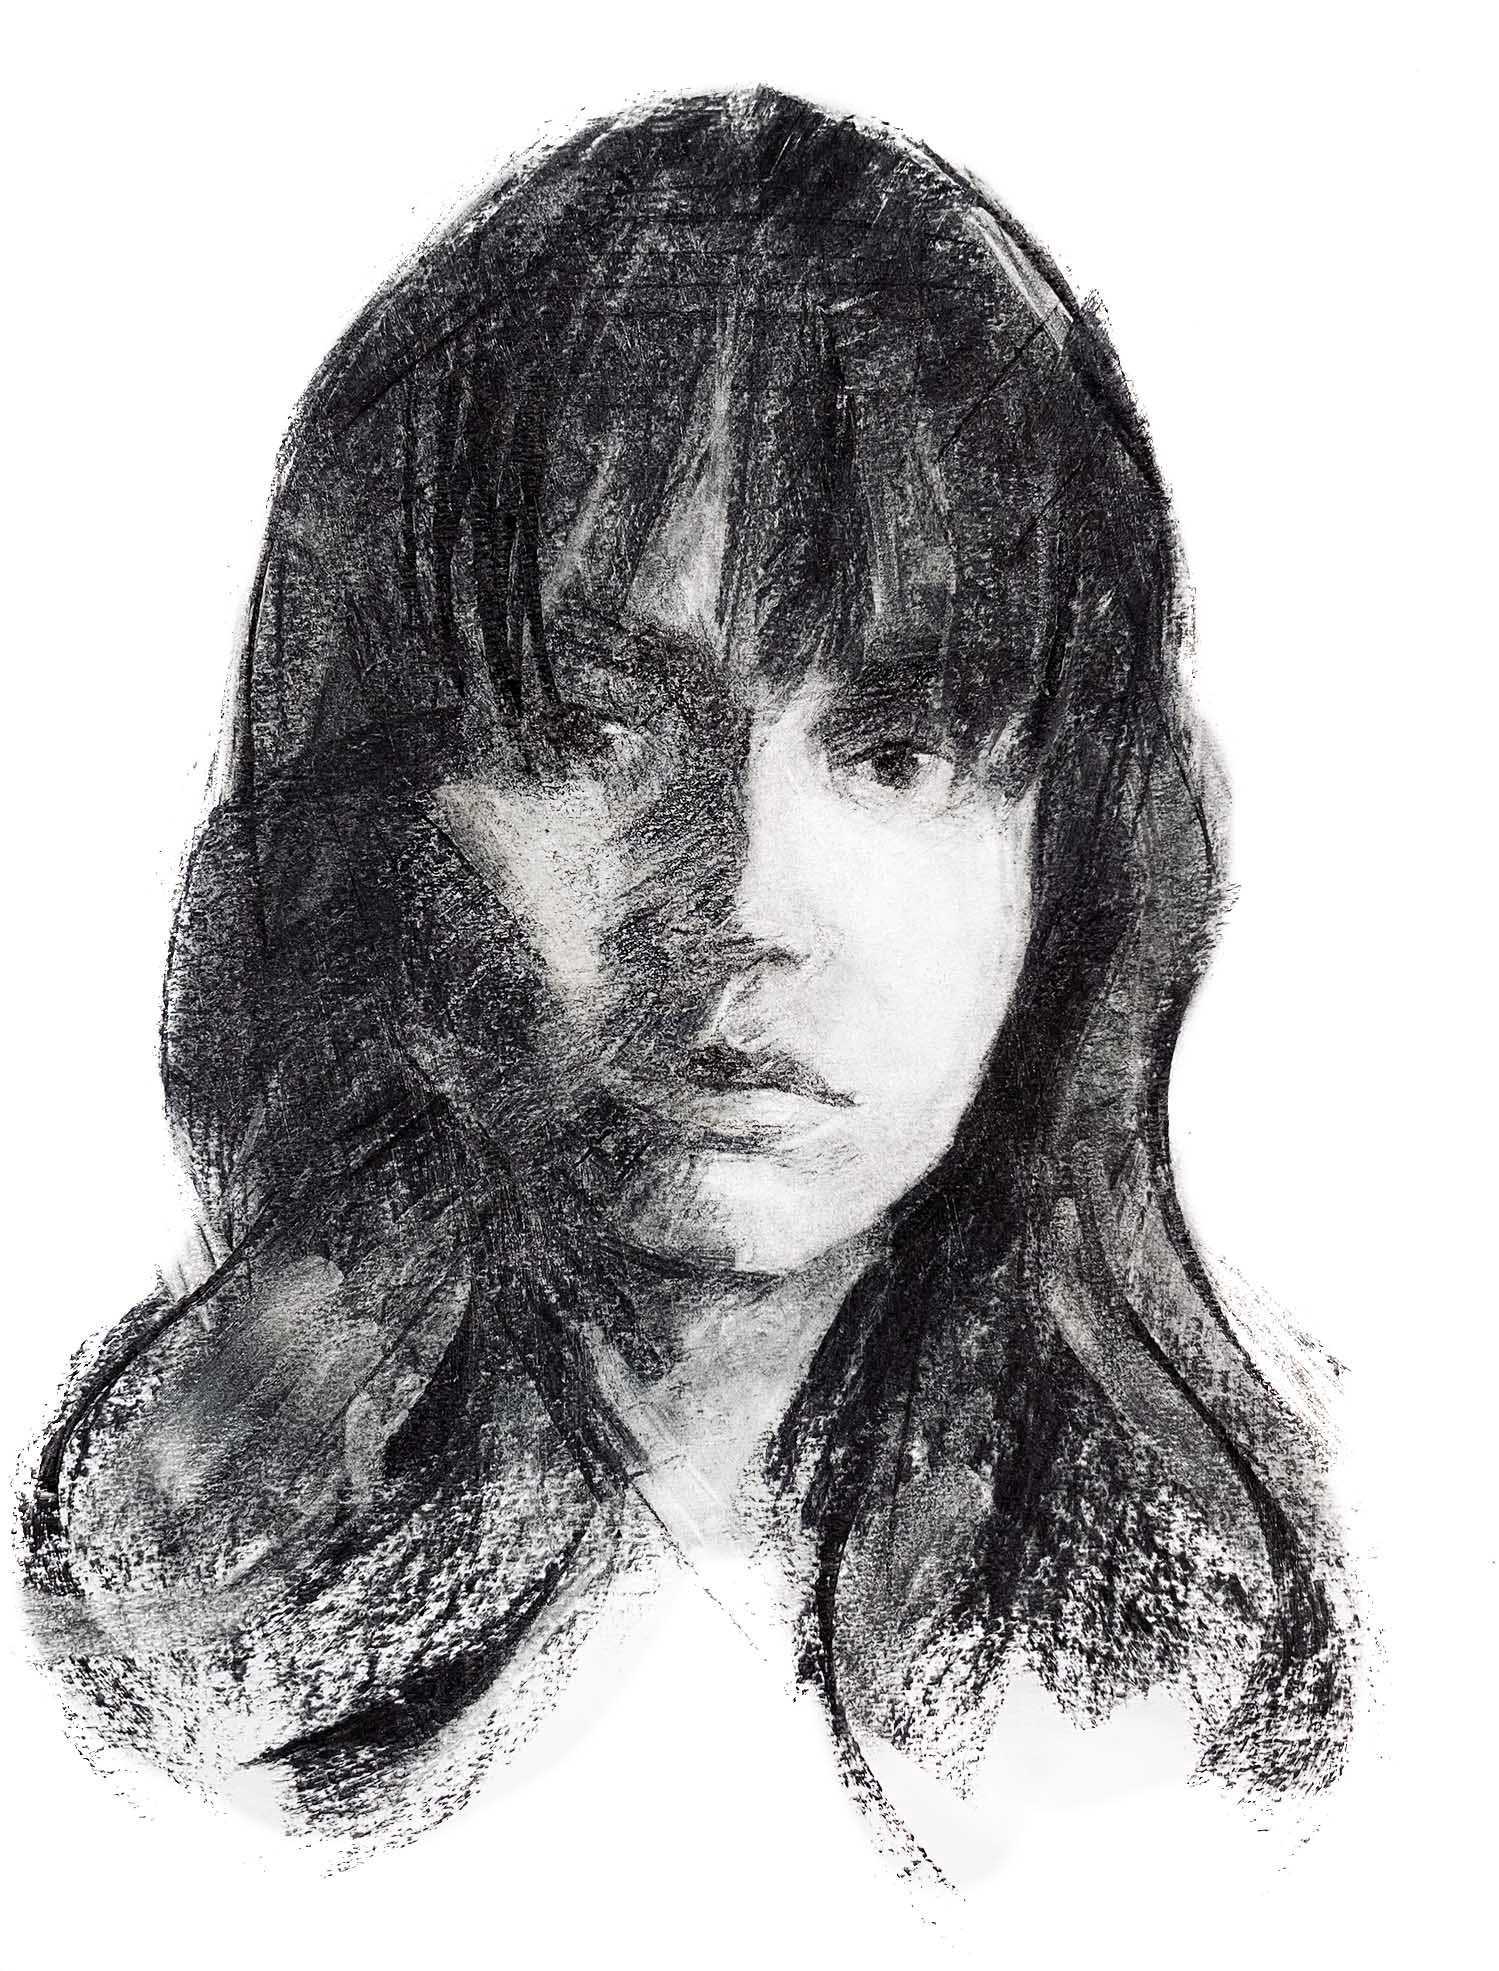 Charcoal study after Zin Lim